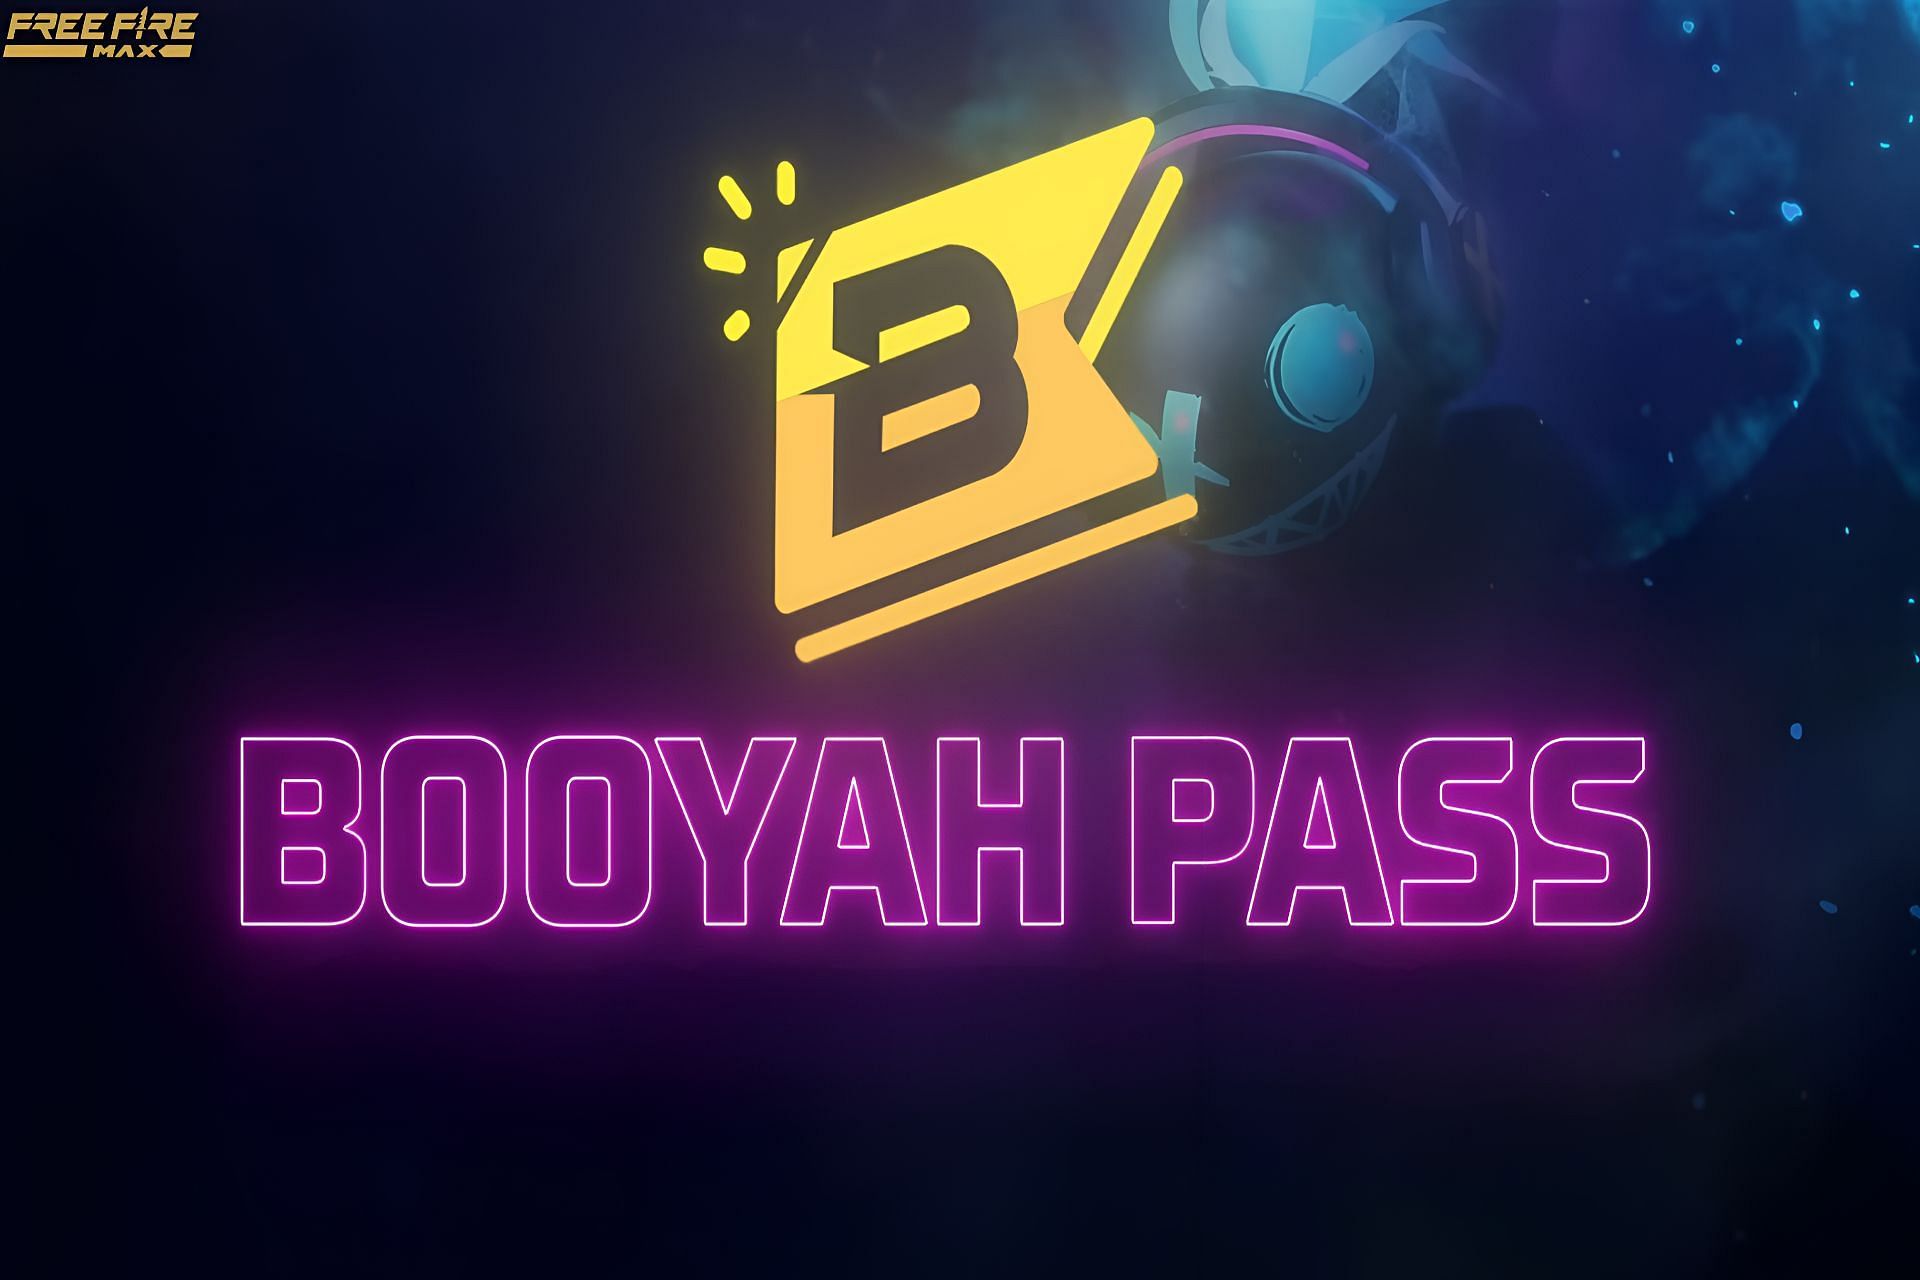 Multiple features of Free Fire MAX Booyah Pass have been confirmed (Image via Garena)